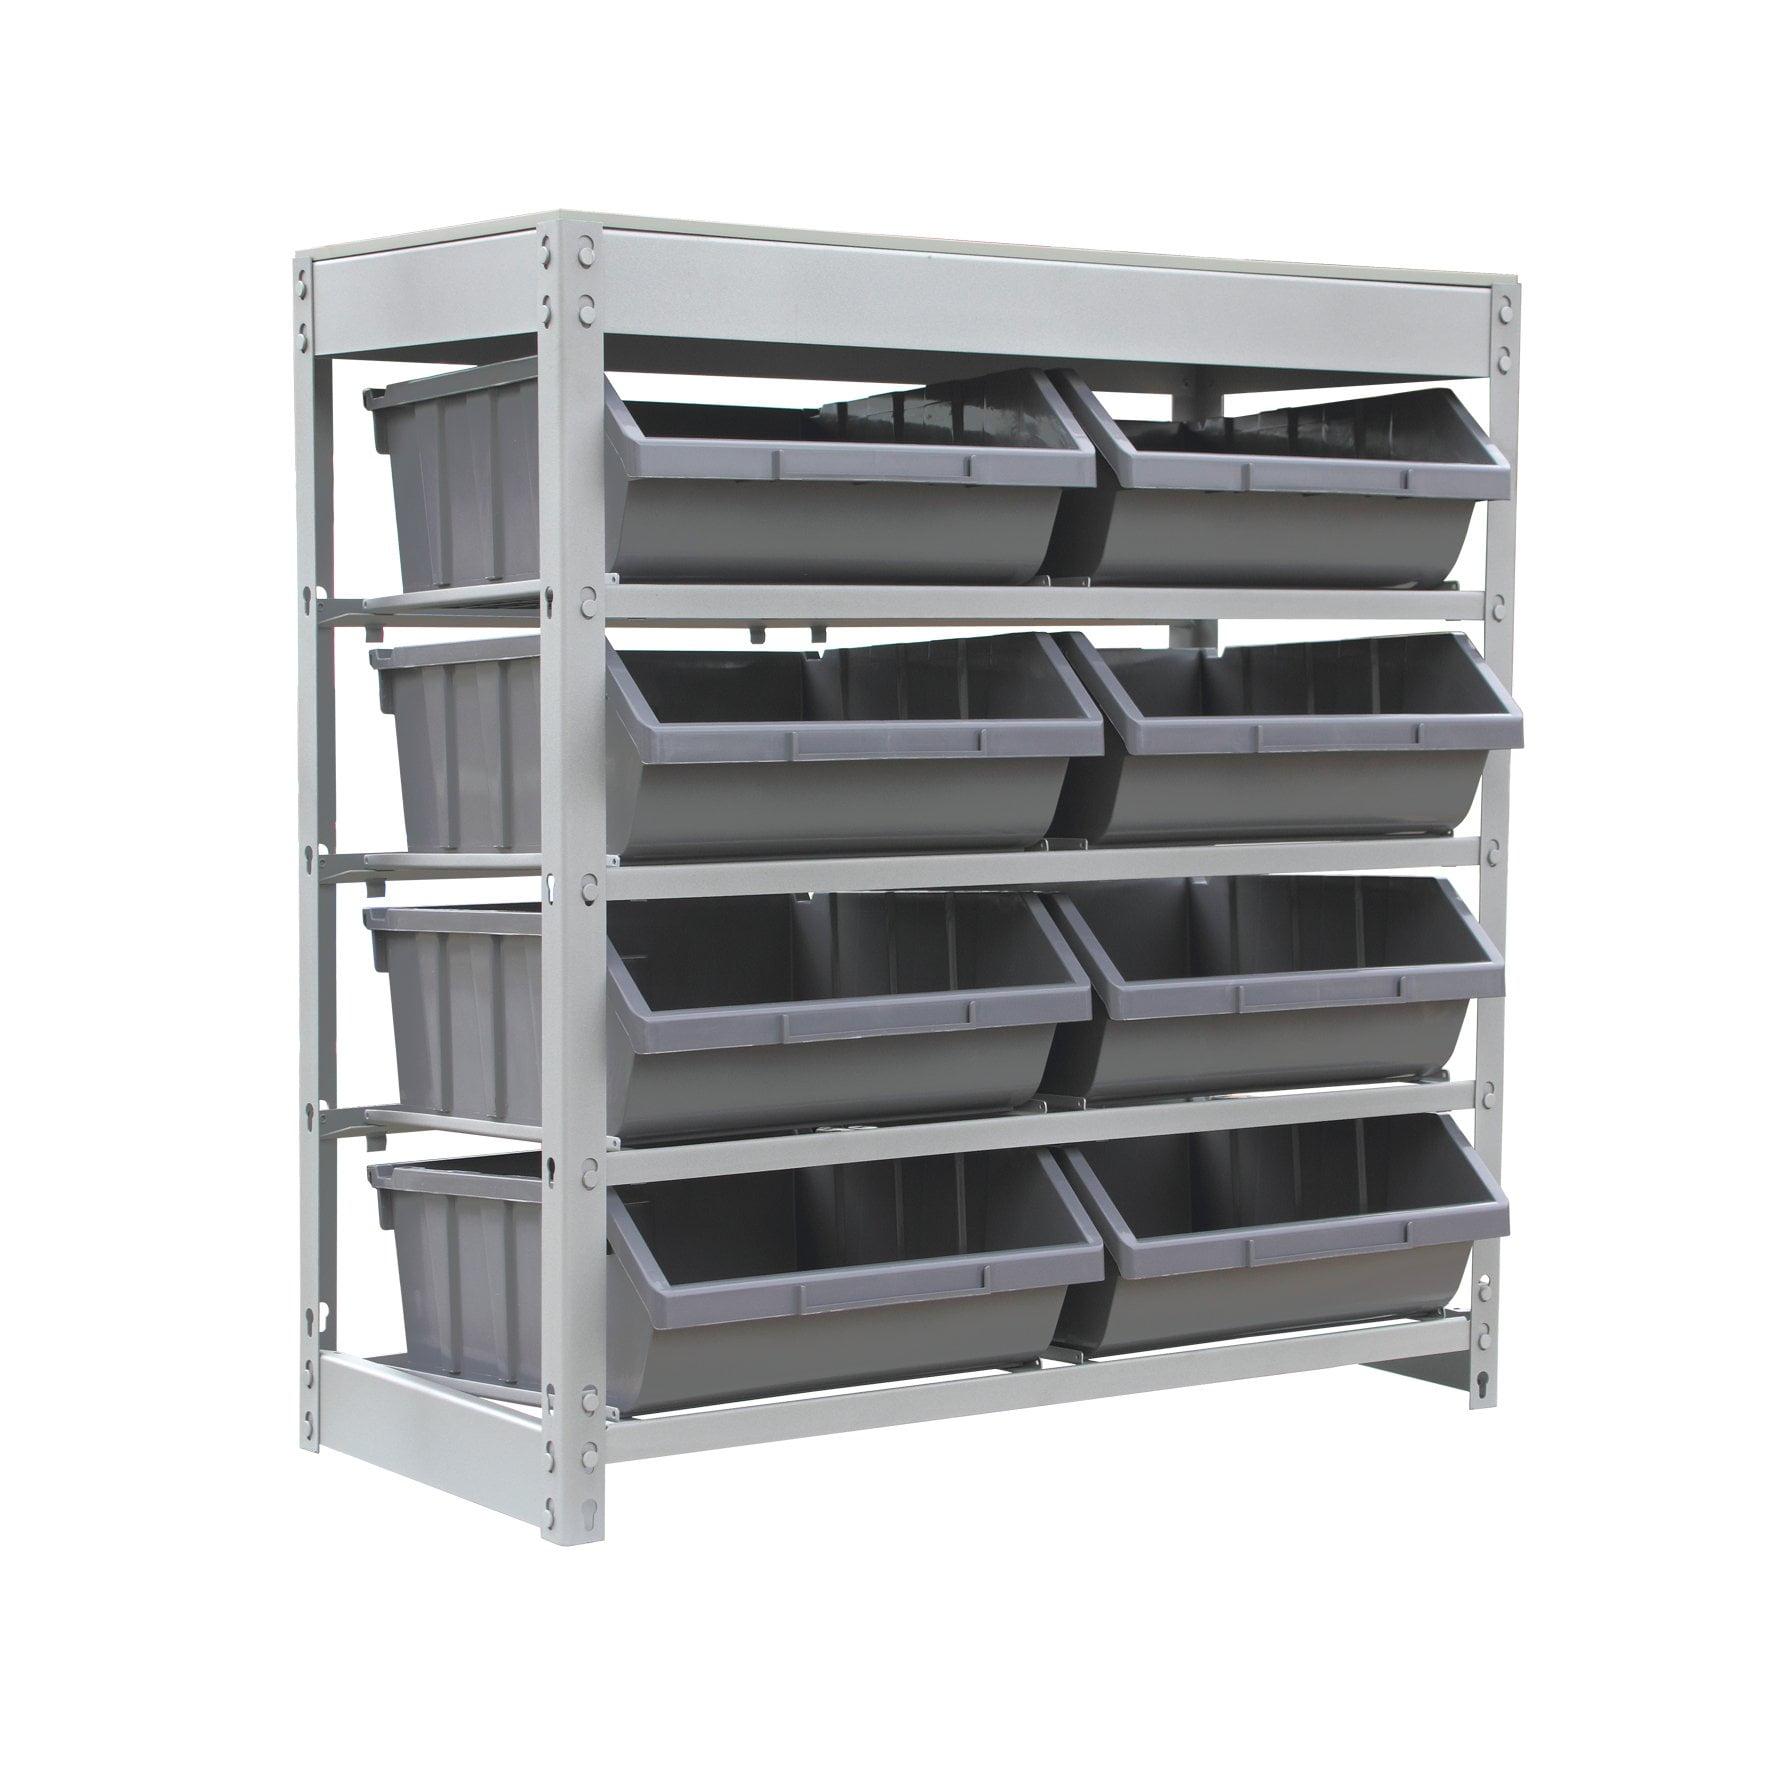 Compact 4-Tier Boltless Steel Bin Rack with Laminated Countertop